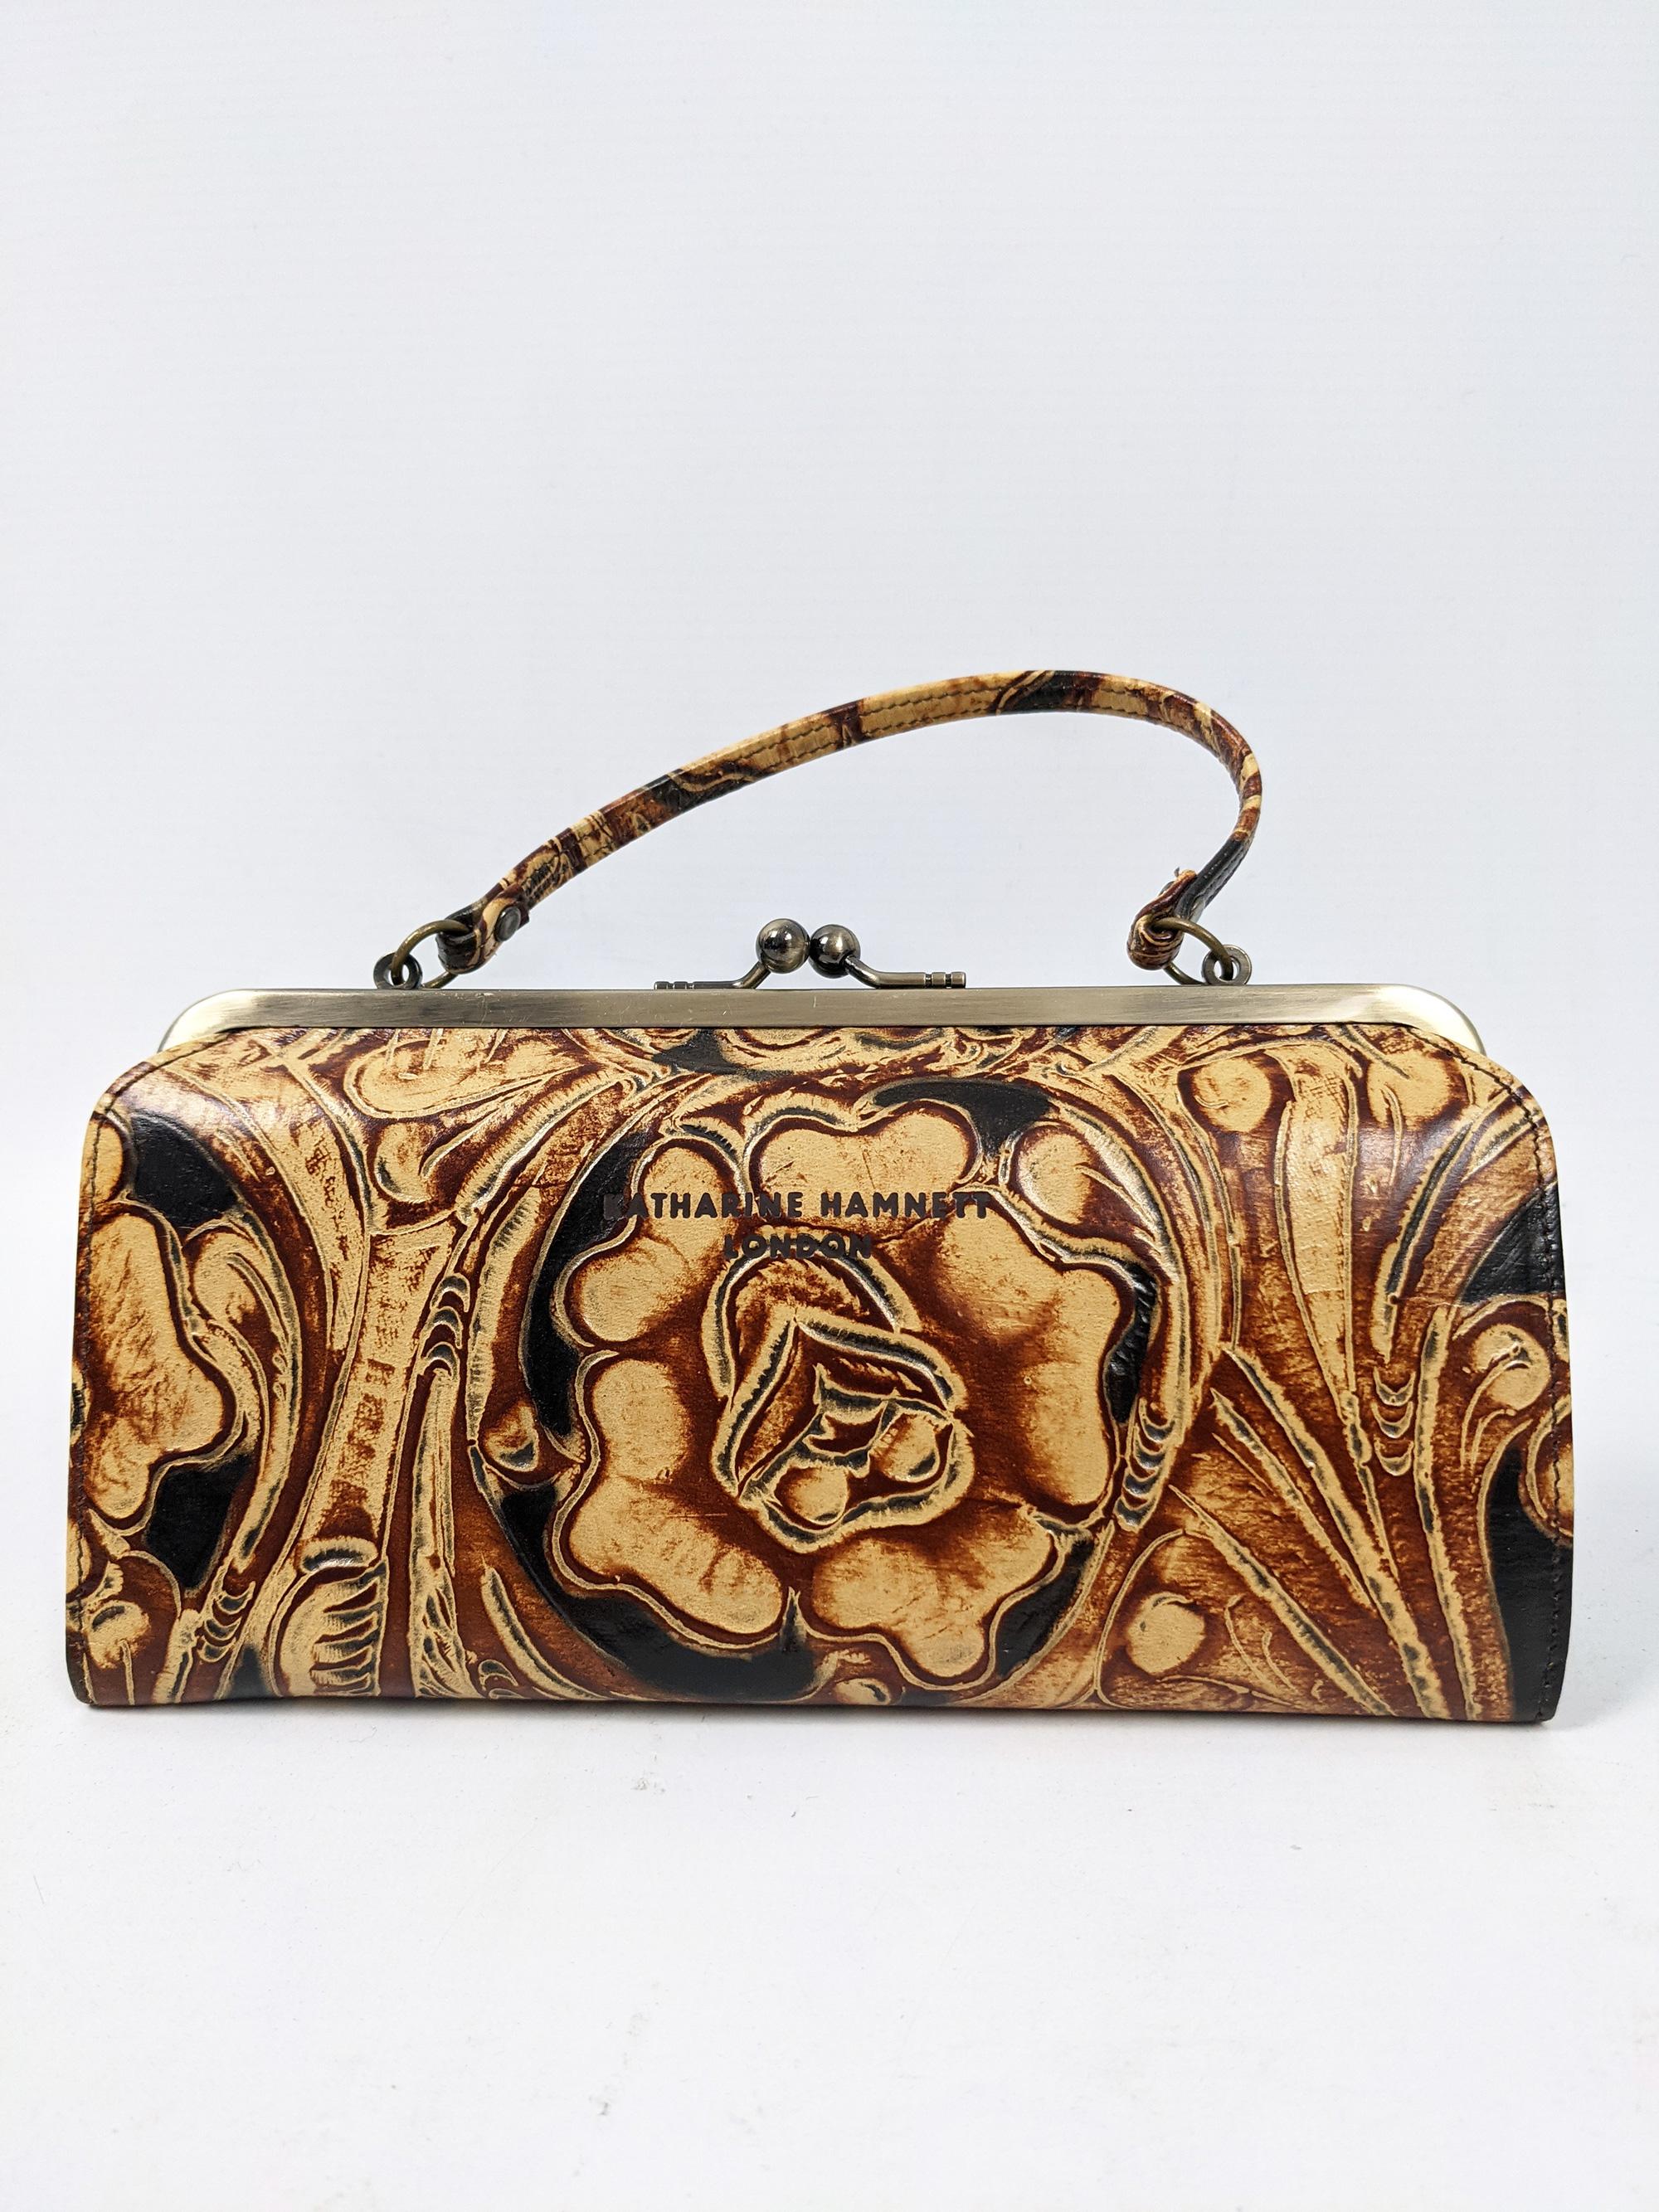 A super cute and tiny vintage Katharine Hamnett mini frame handbag / purse in a brown floral embossed leather with  clasp fastening and short handle. 

Size: 
Length - 20cm / 7.5